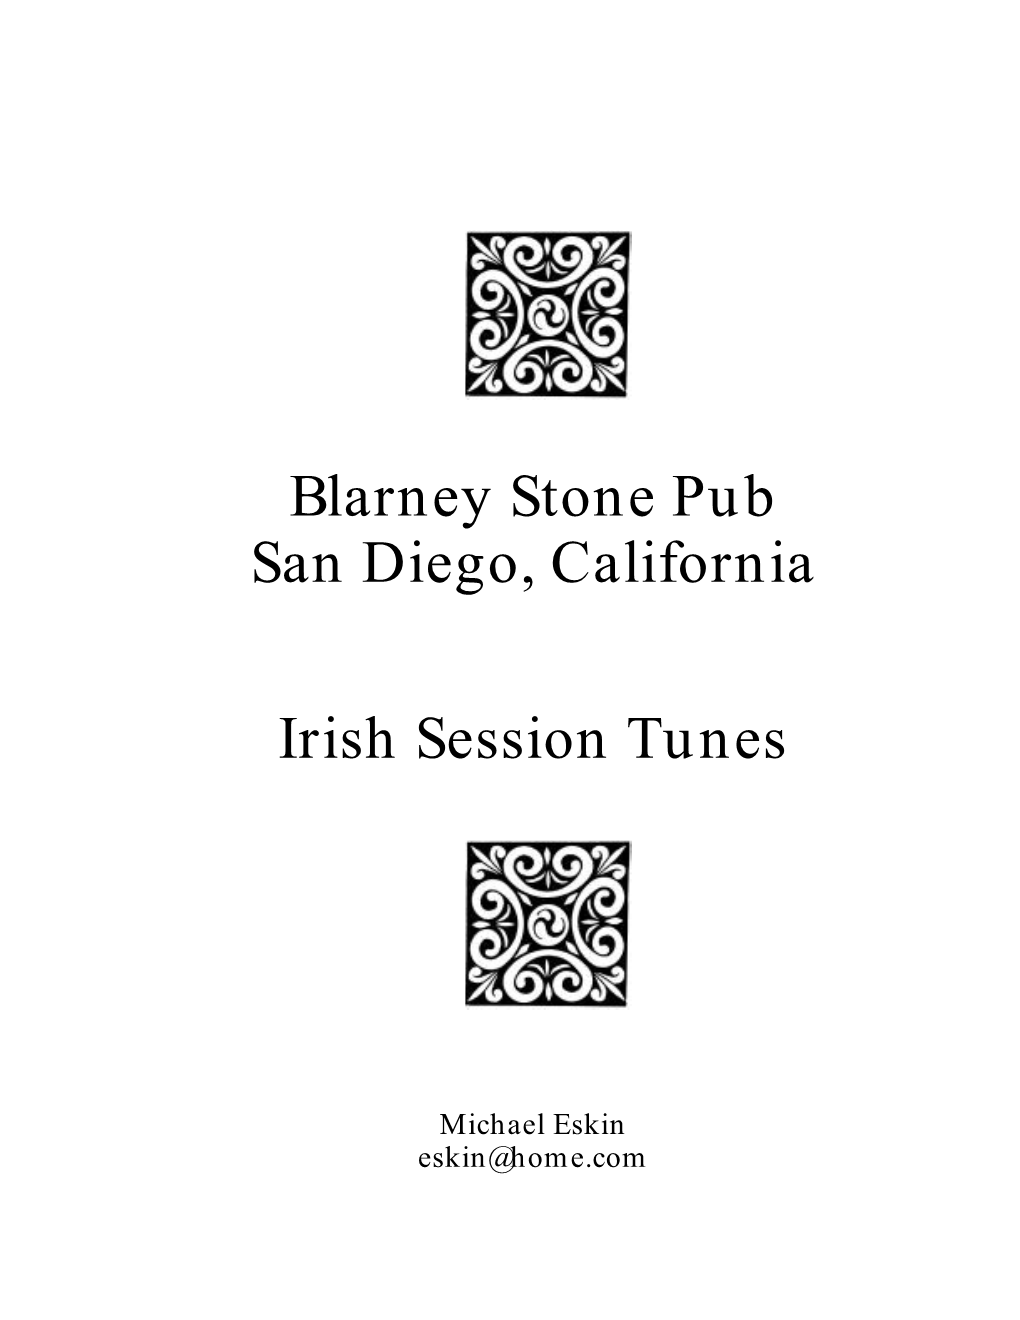 The Blarney Stone Pub and at the House of Ireland in Balboa Park for Welcoming Me Into the World of Irish Session Music